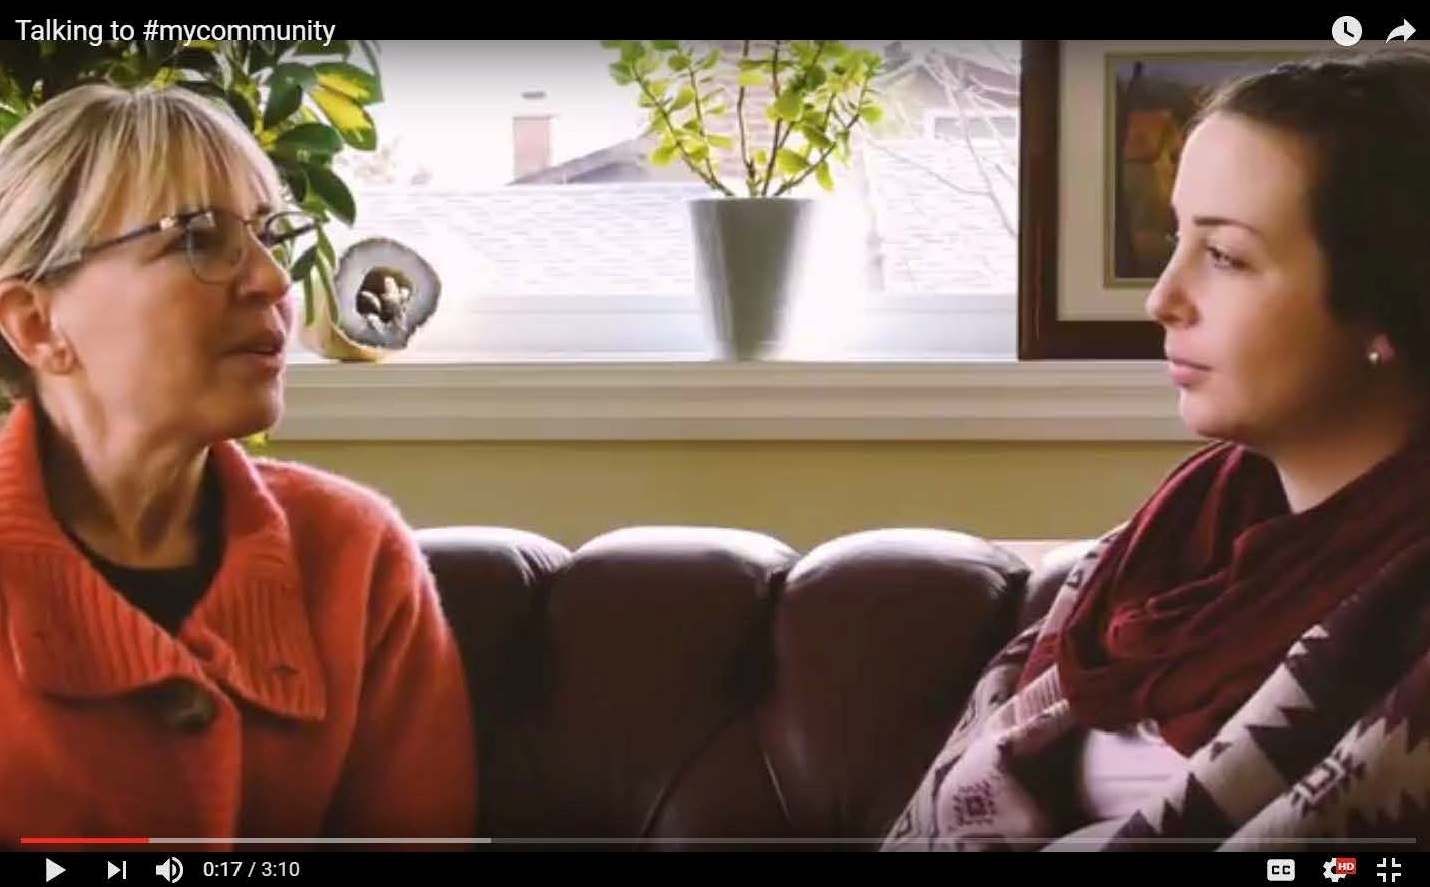 Lori Weber and her daughter Stacey talk about advance care planning in new video